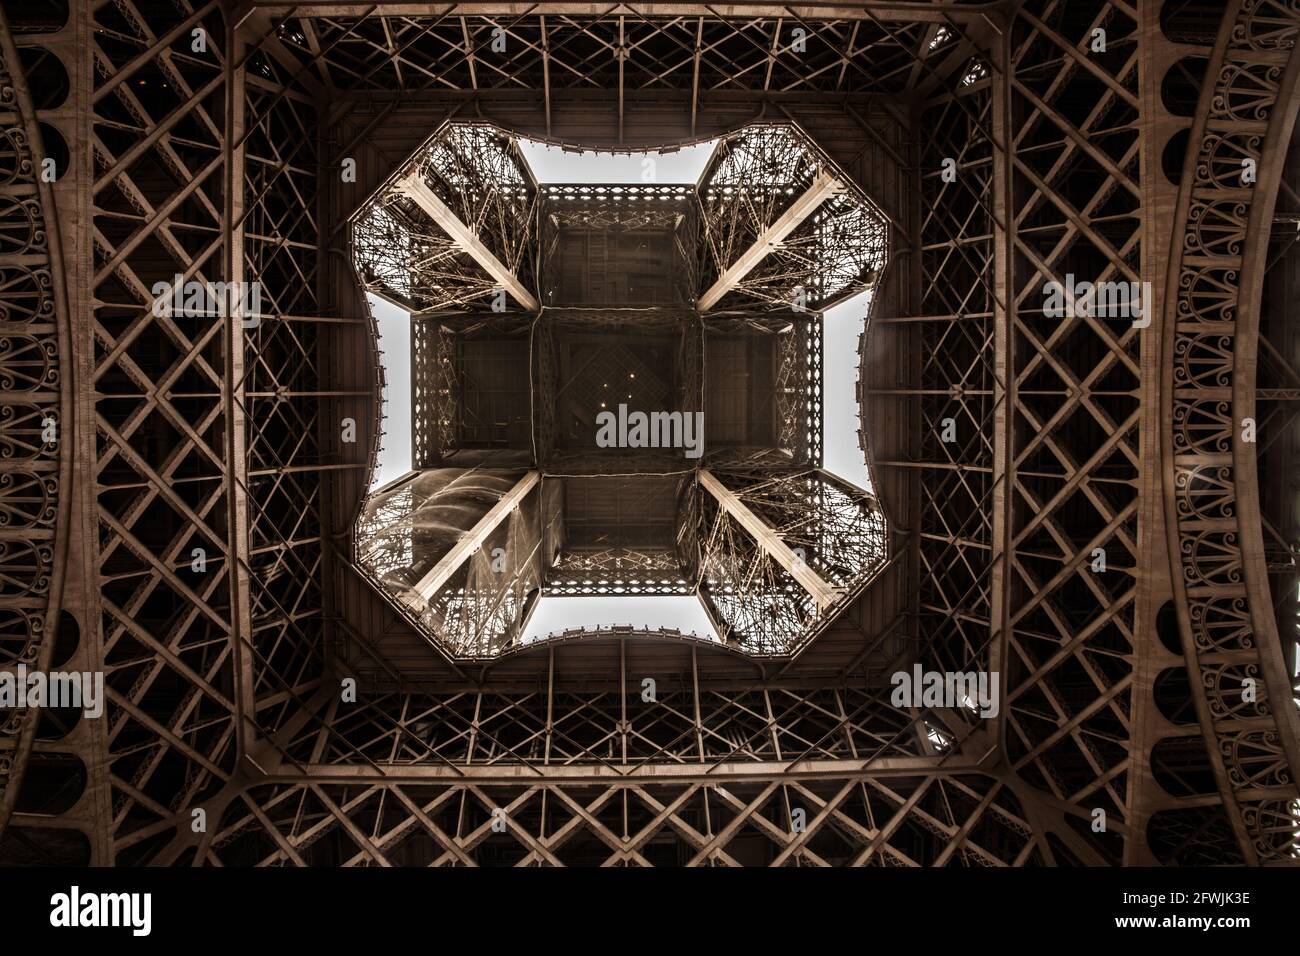 Close up of iron steel beams of the iconic Eiffel Tower in Paris, France Stock Photo